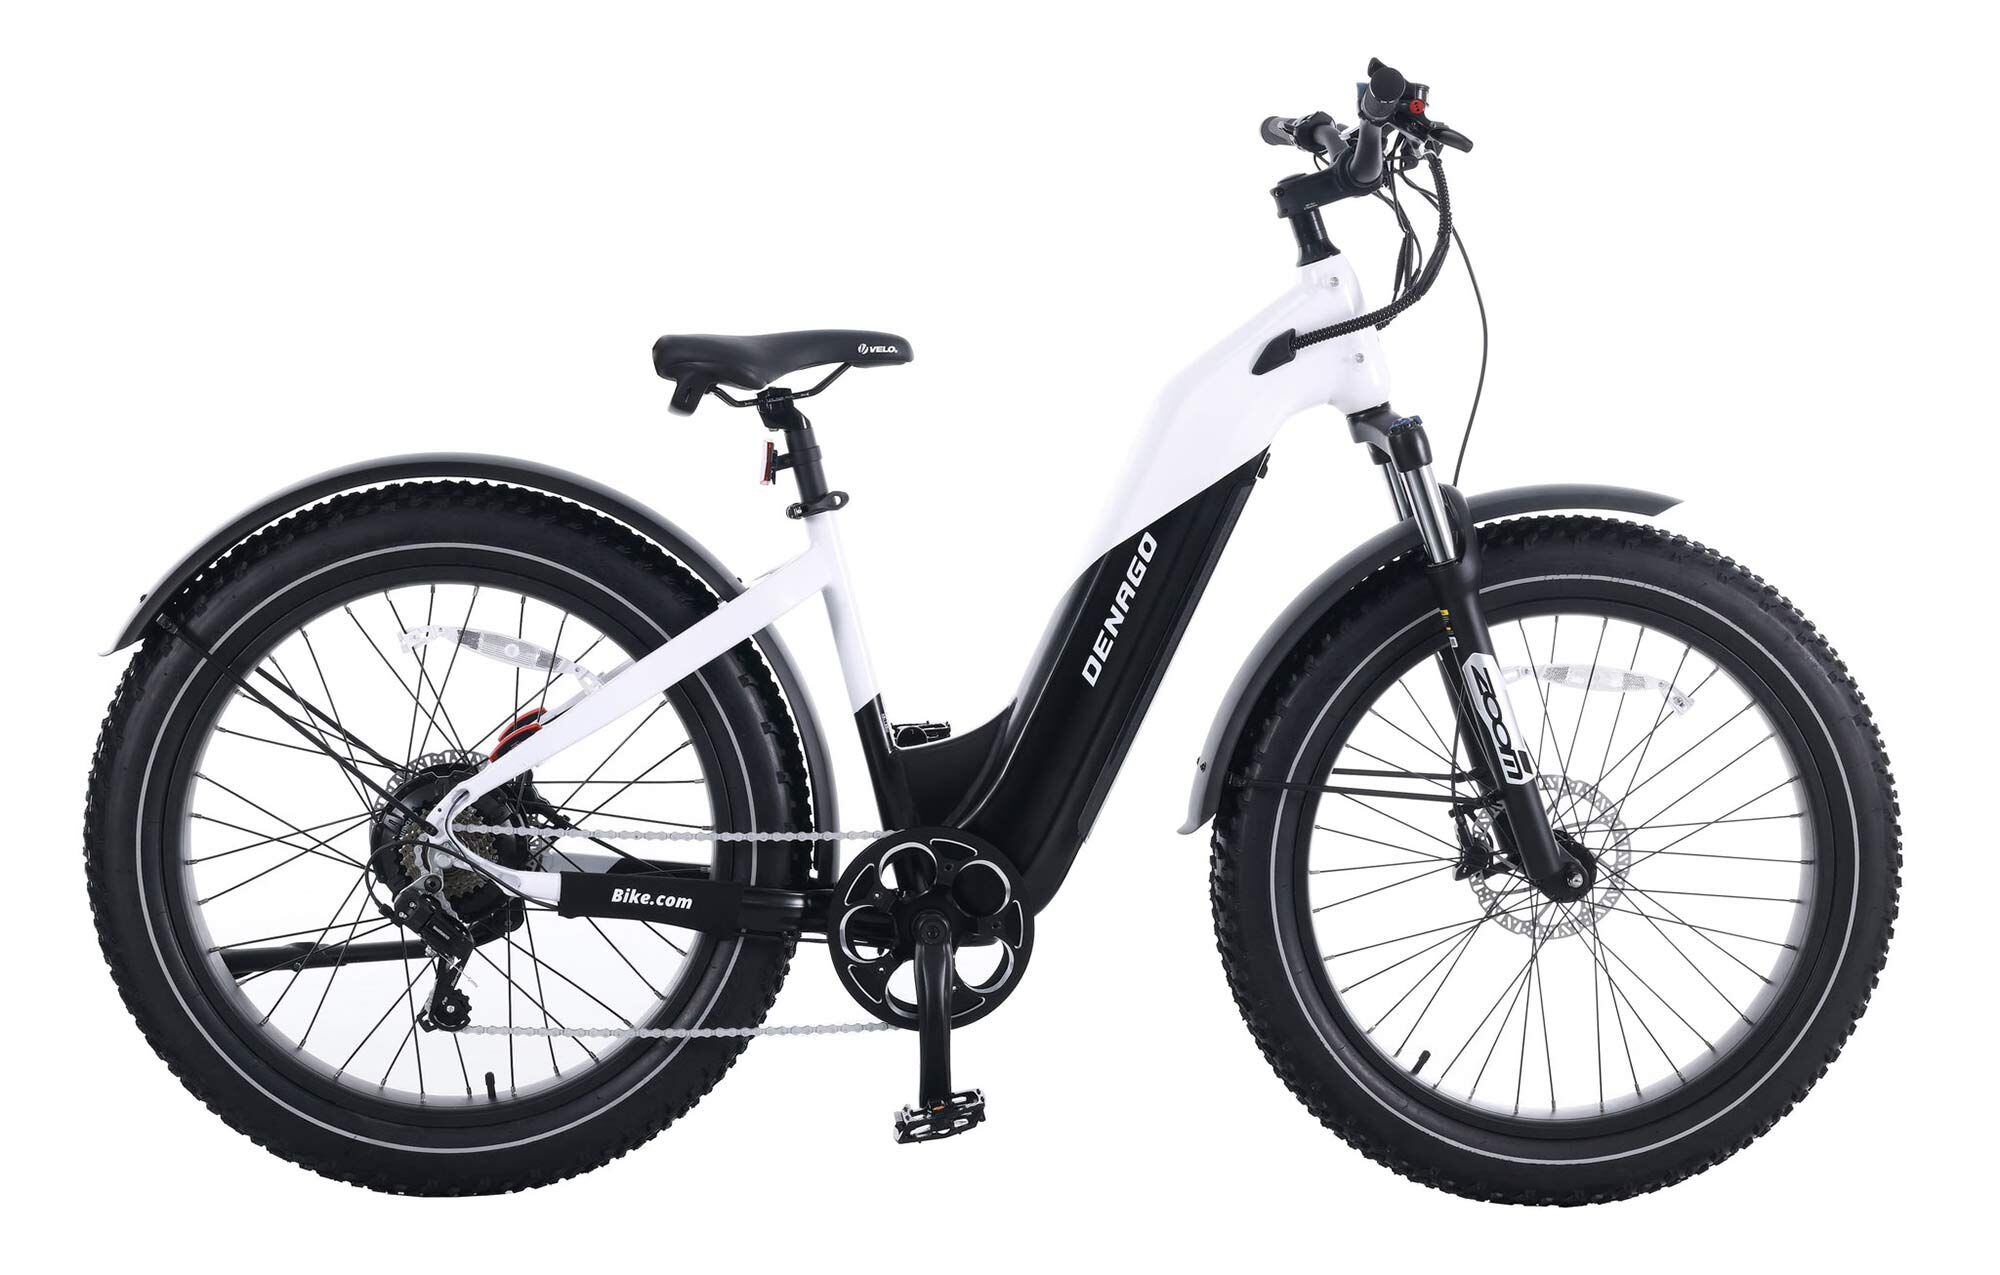 The Denago Fat Tire Step-Thru is priced at $1,999 and comes in two sizes to fit riders 5-foot-4 to 6-foot-5.